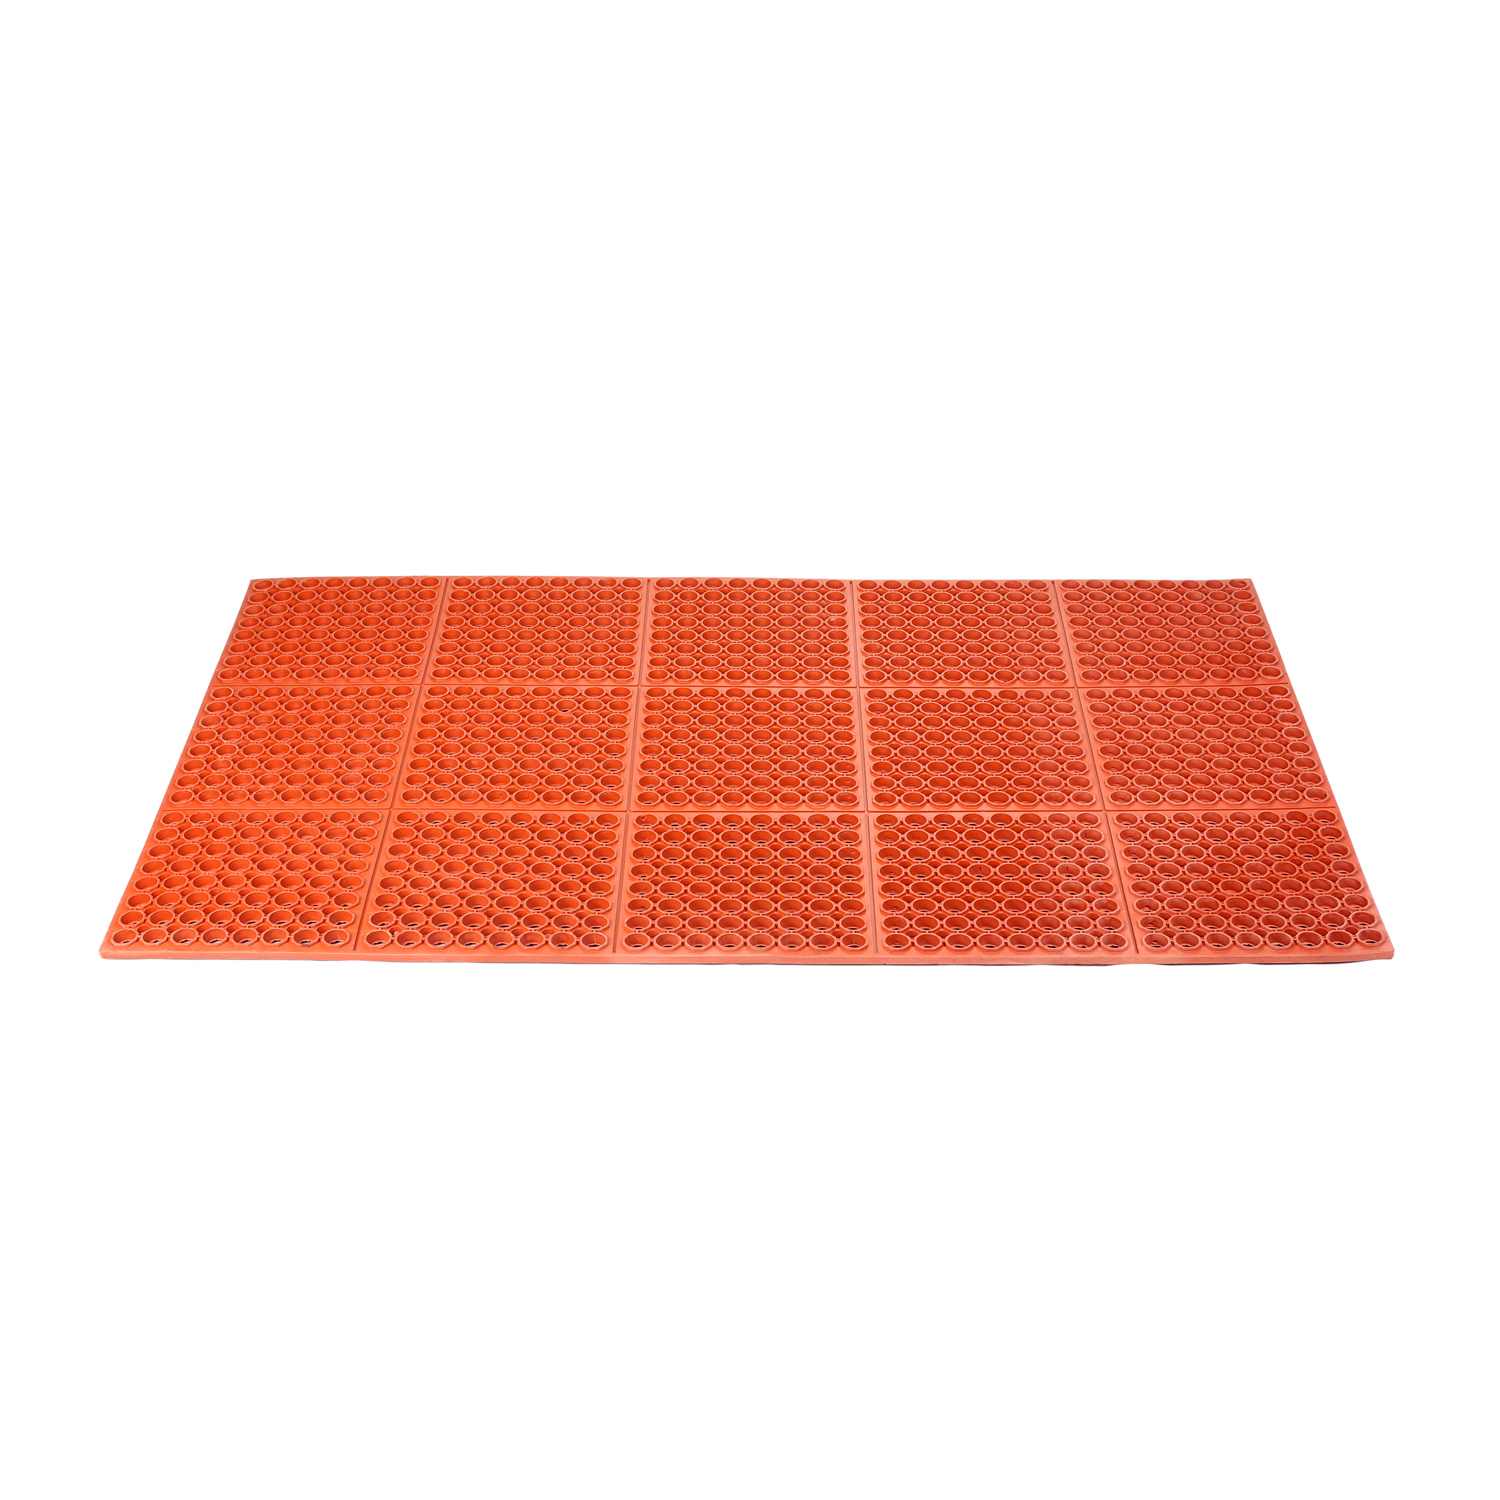 CAC China RMAT-35RD Red Straight Edge Rubber Floor Mat 5" x 3"